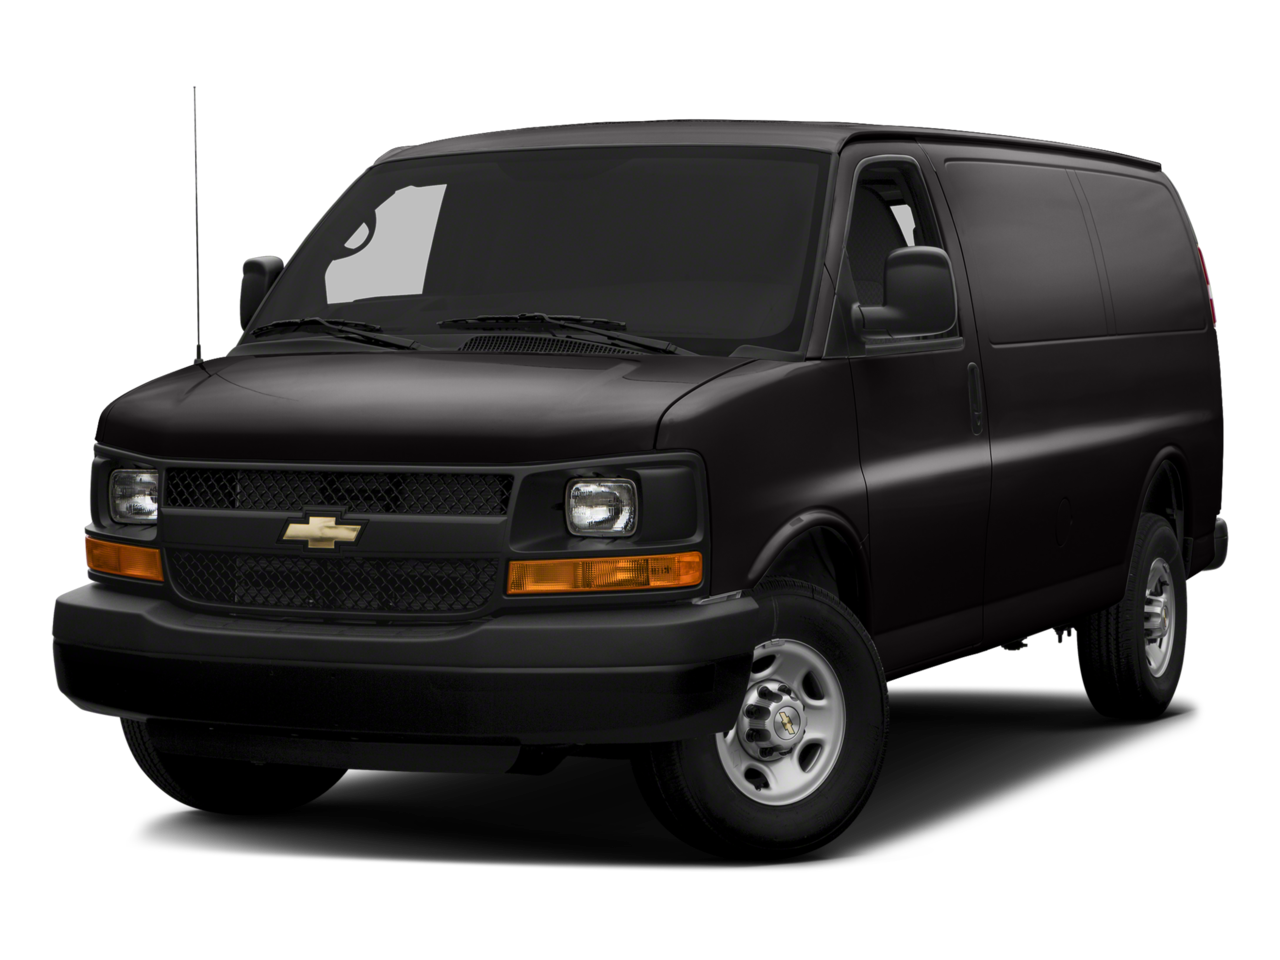 2016 Chevrolet Express 3500 Repair: Service and Maintenance Cost